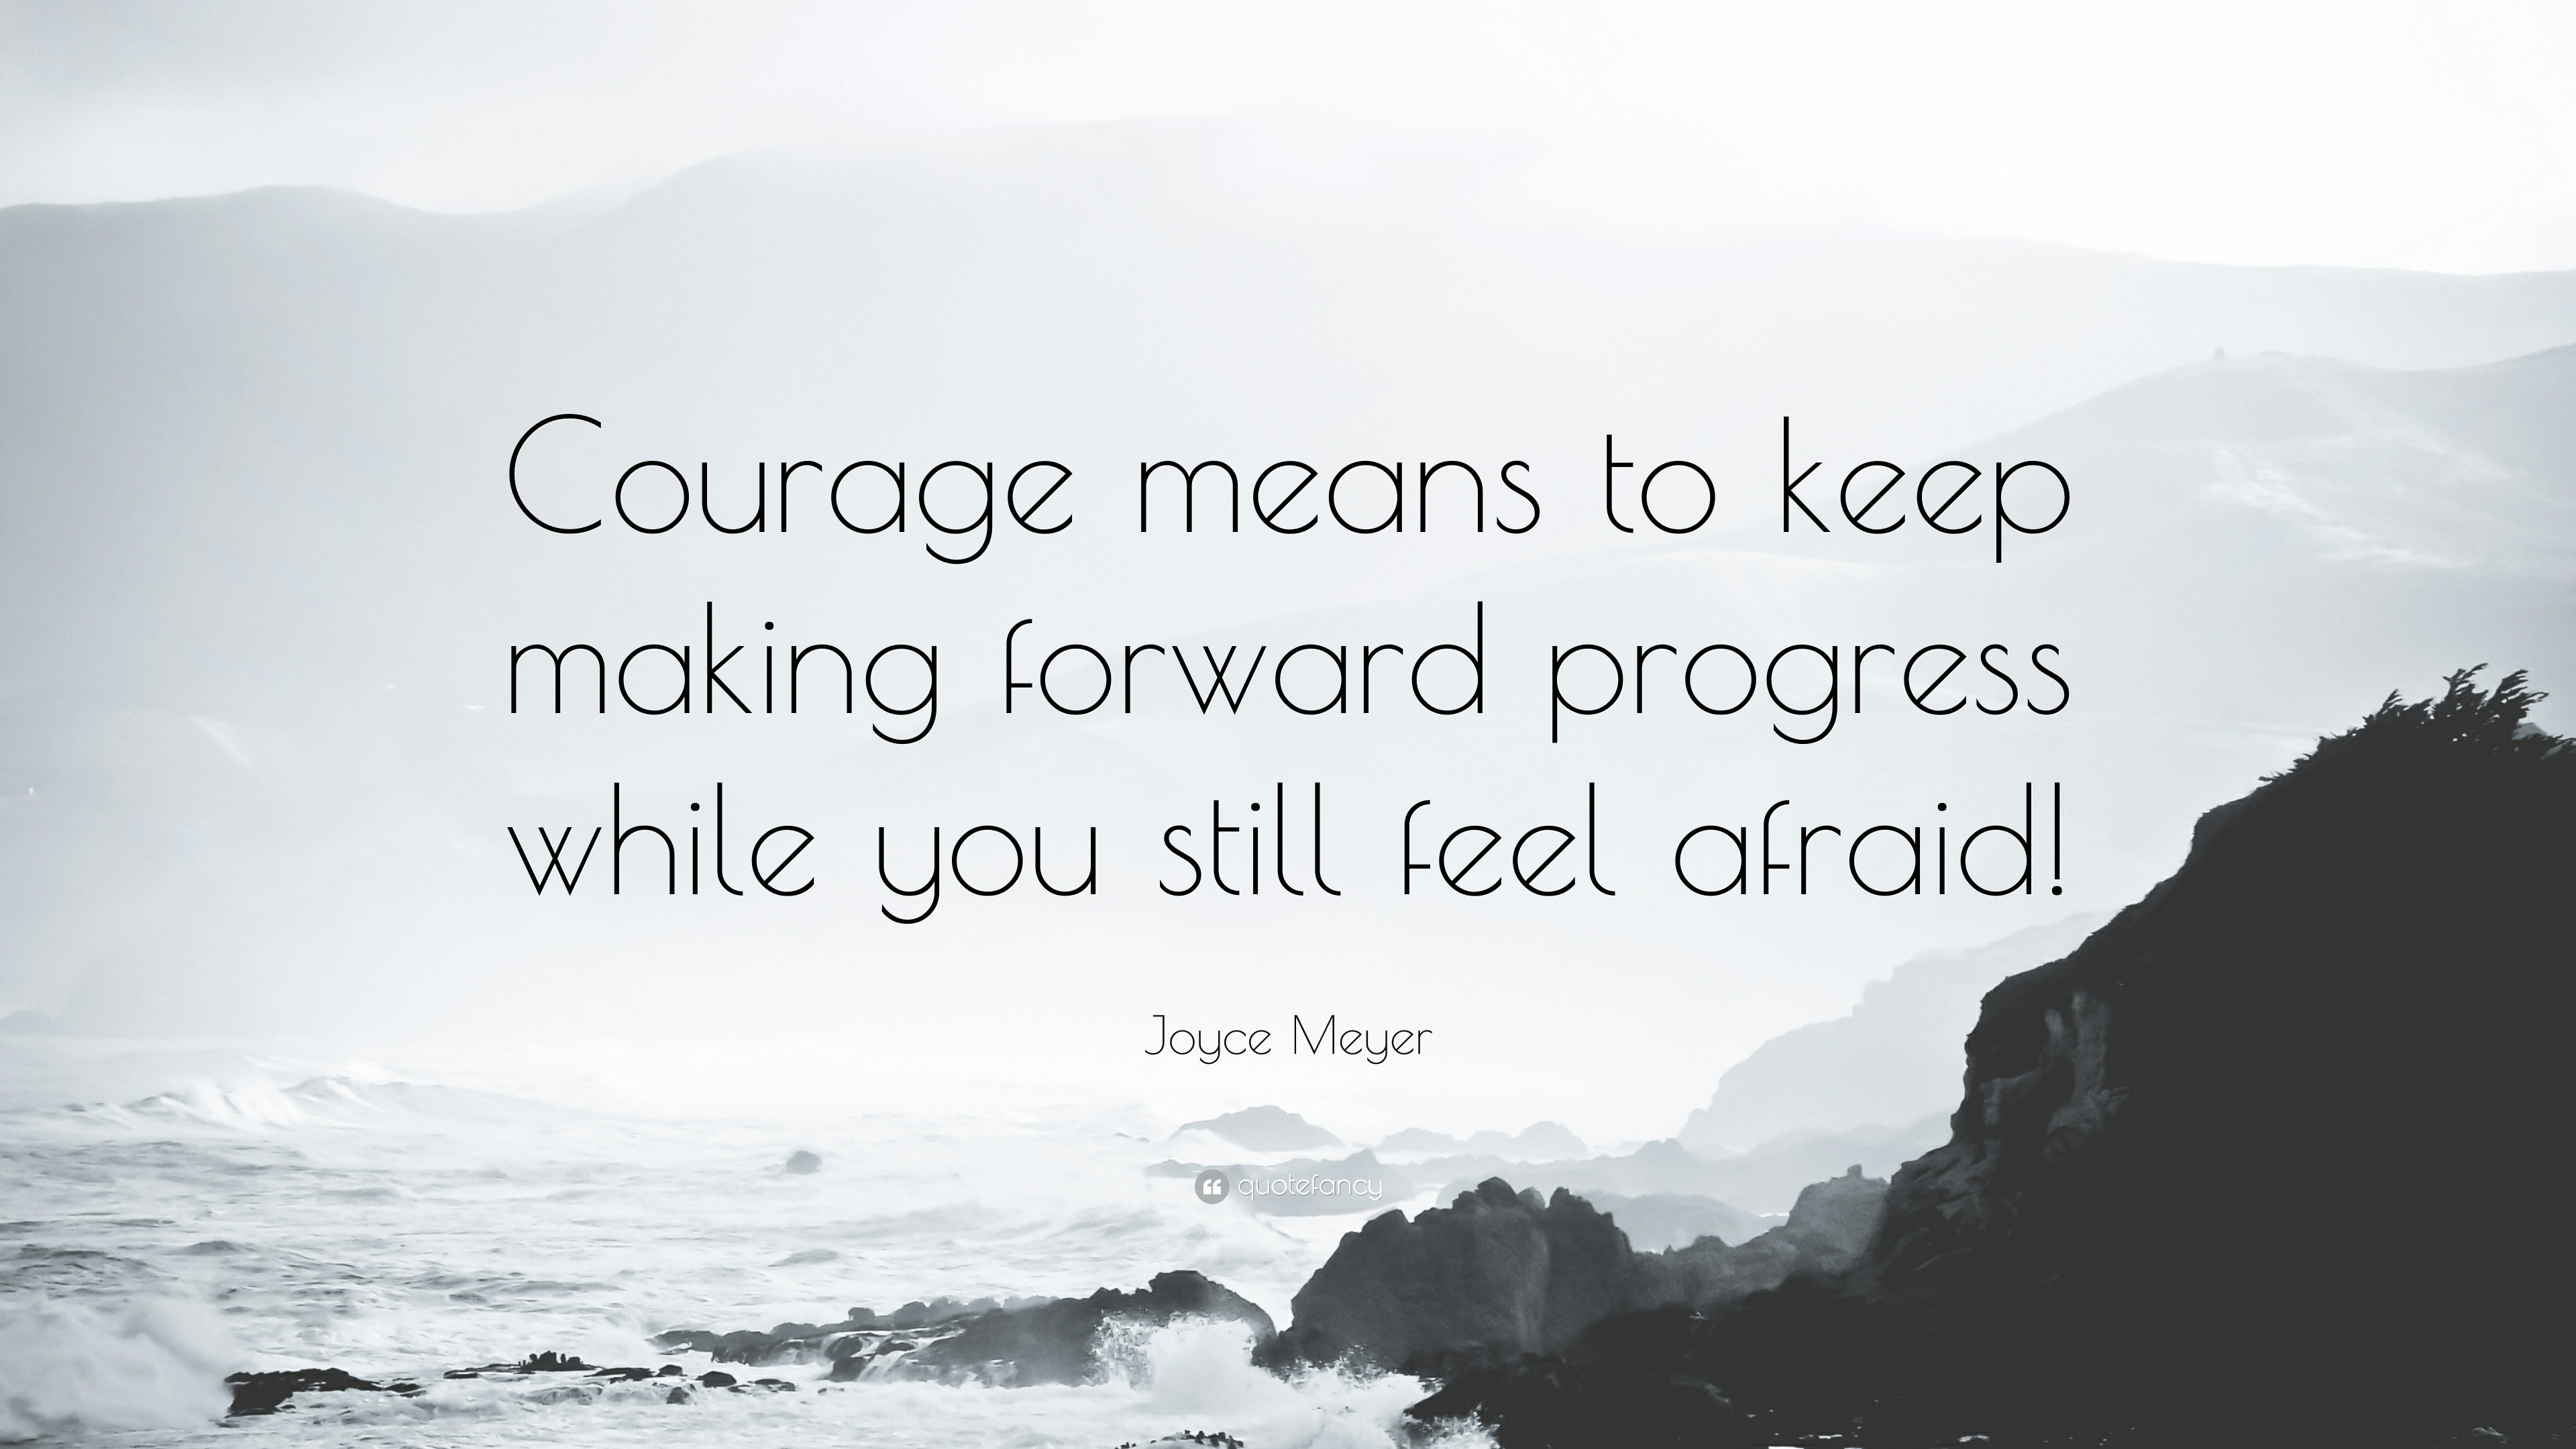 Image result for quotes about progress